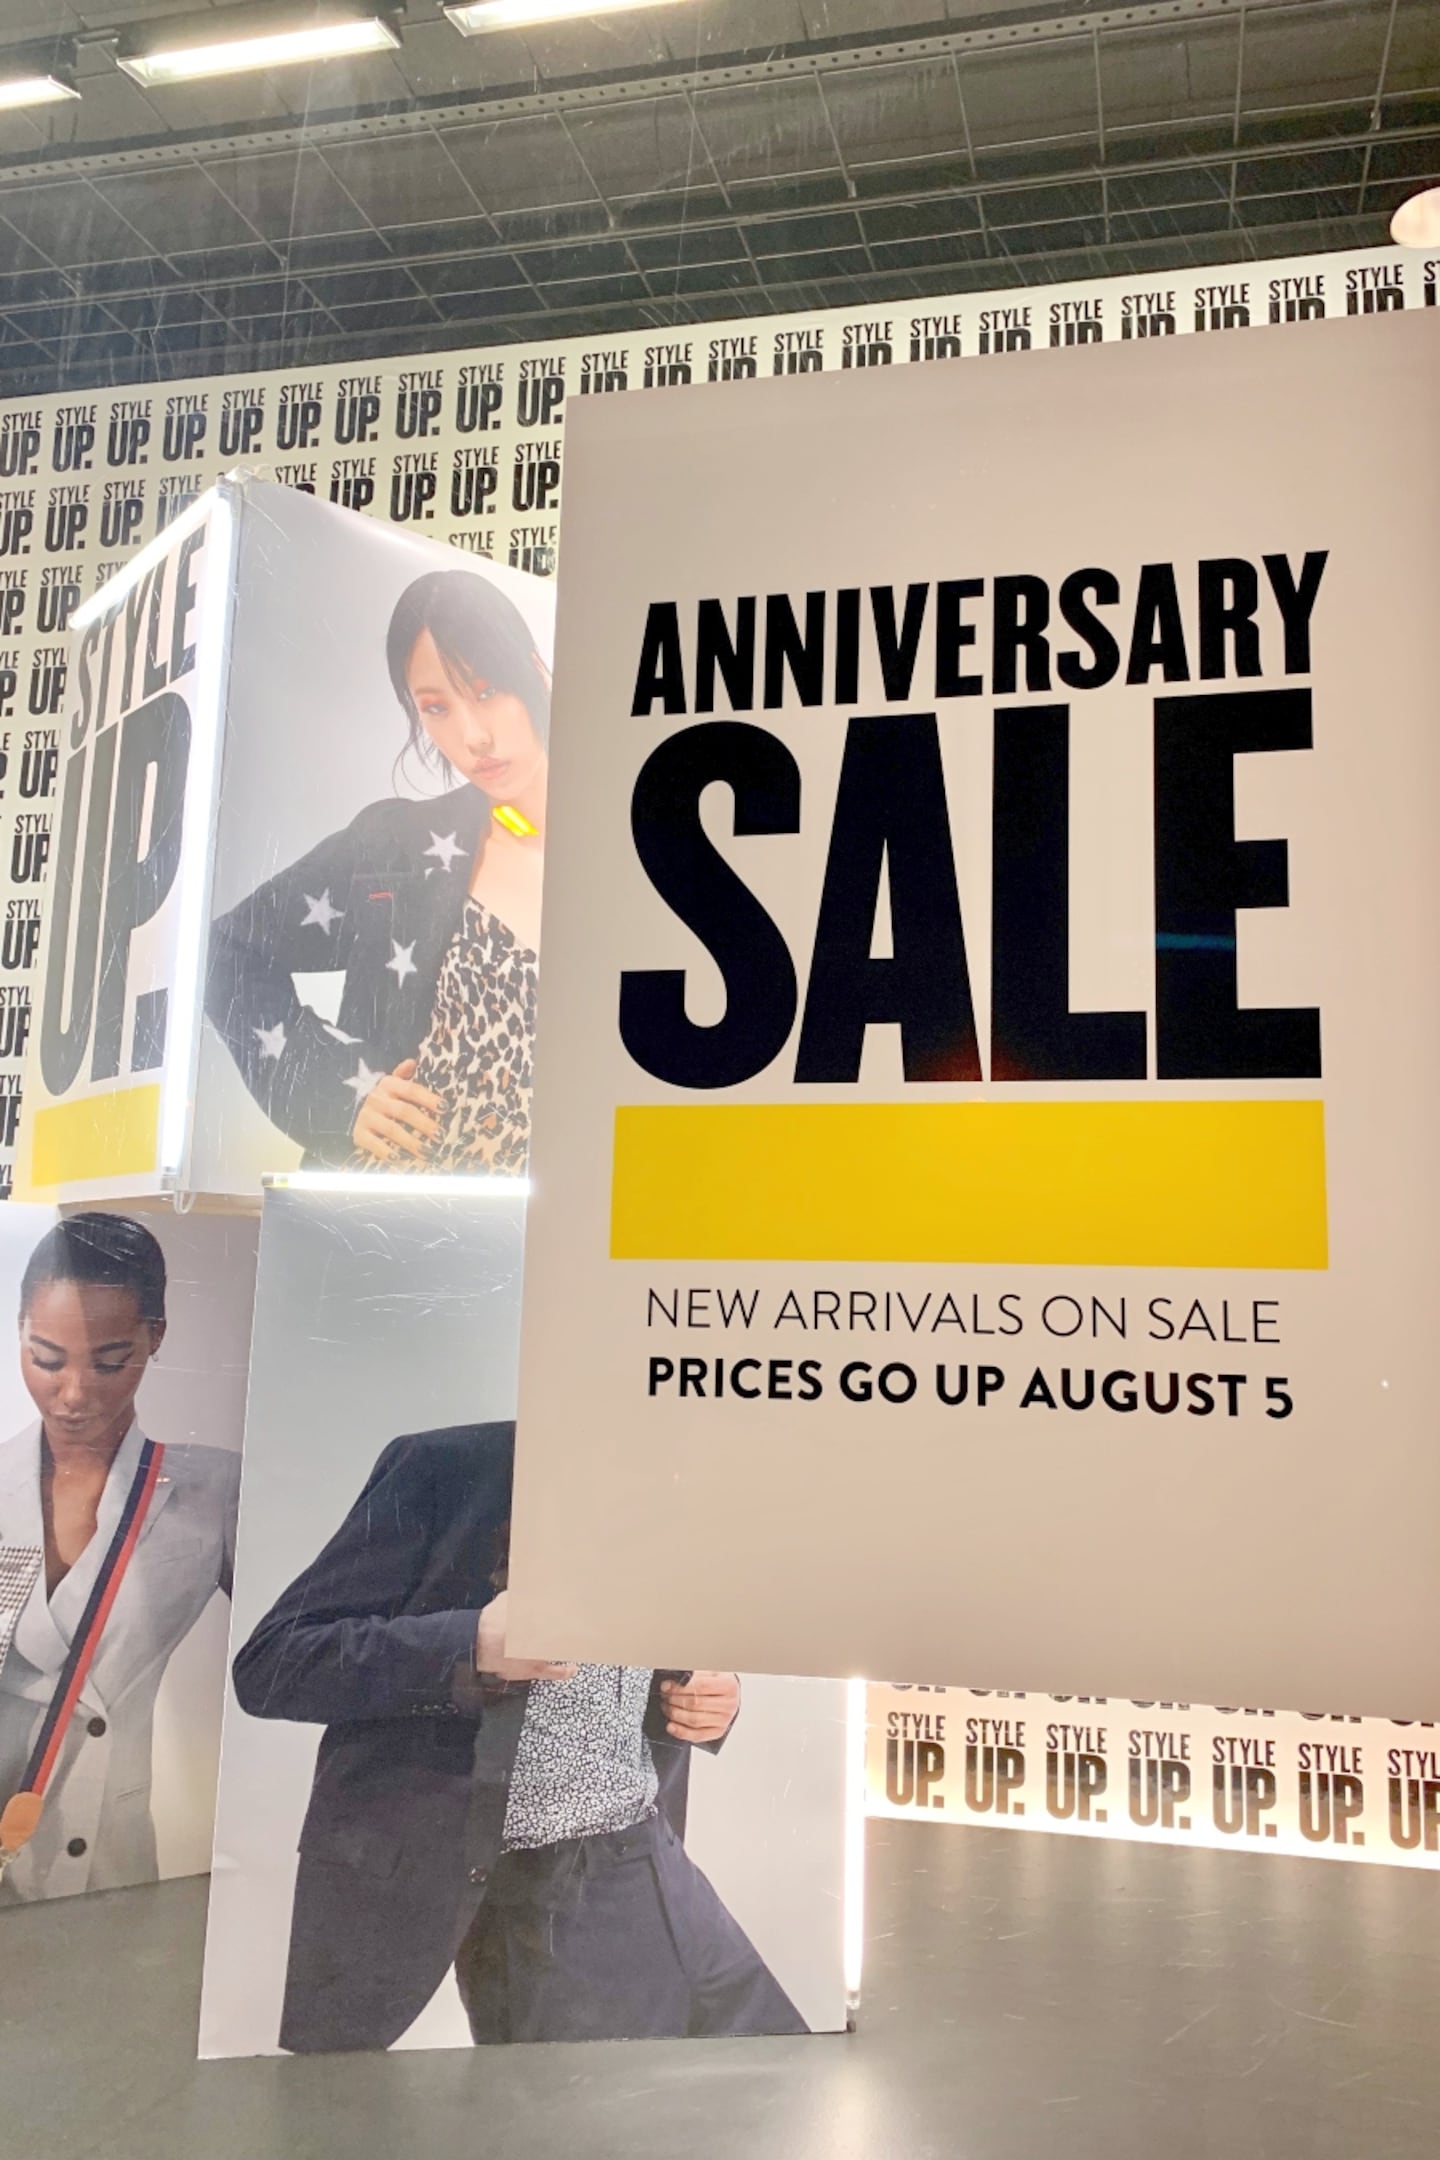 Nordstrom's annual Anniversary Sale has been an influencer favourite for years, generating six or seven figures of income for top performers.